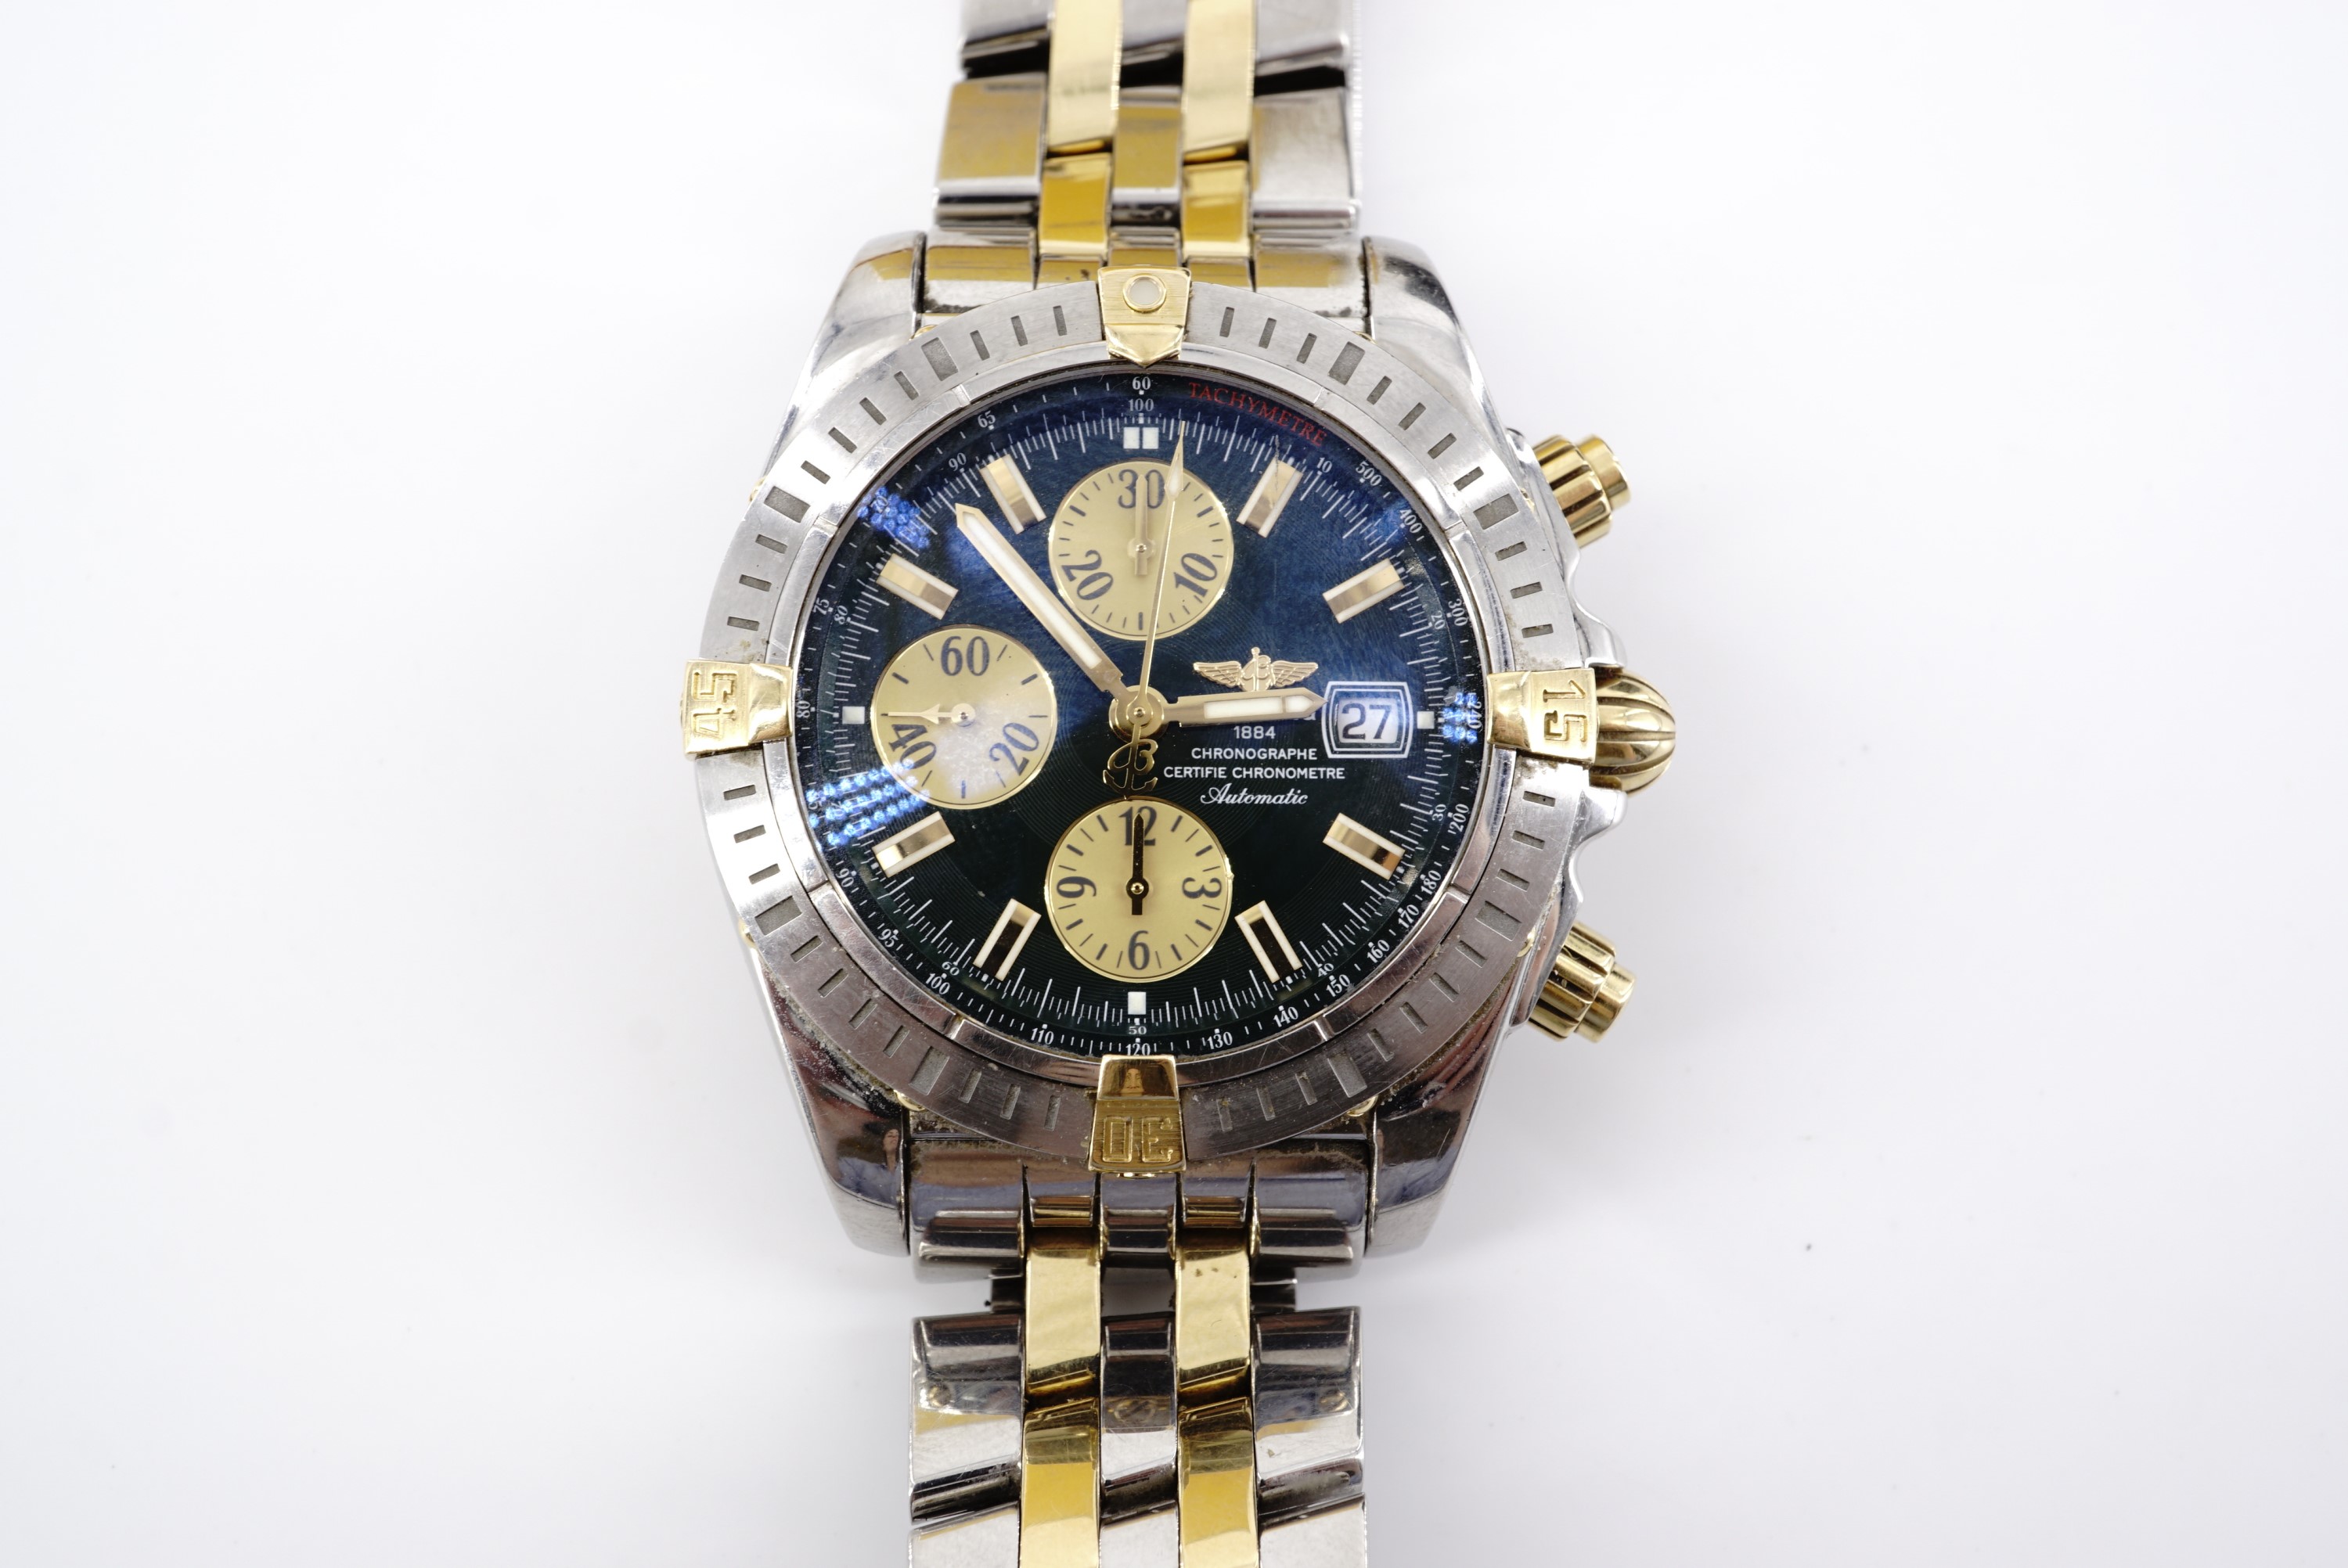 A Breitling Chronographe Certifie Chronometre Automatic wristwatch, in stainless steel with yellow